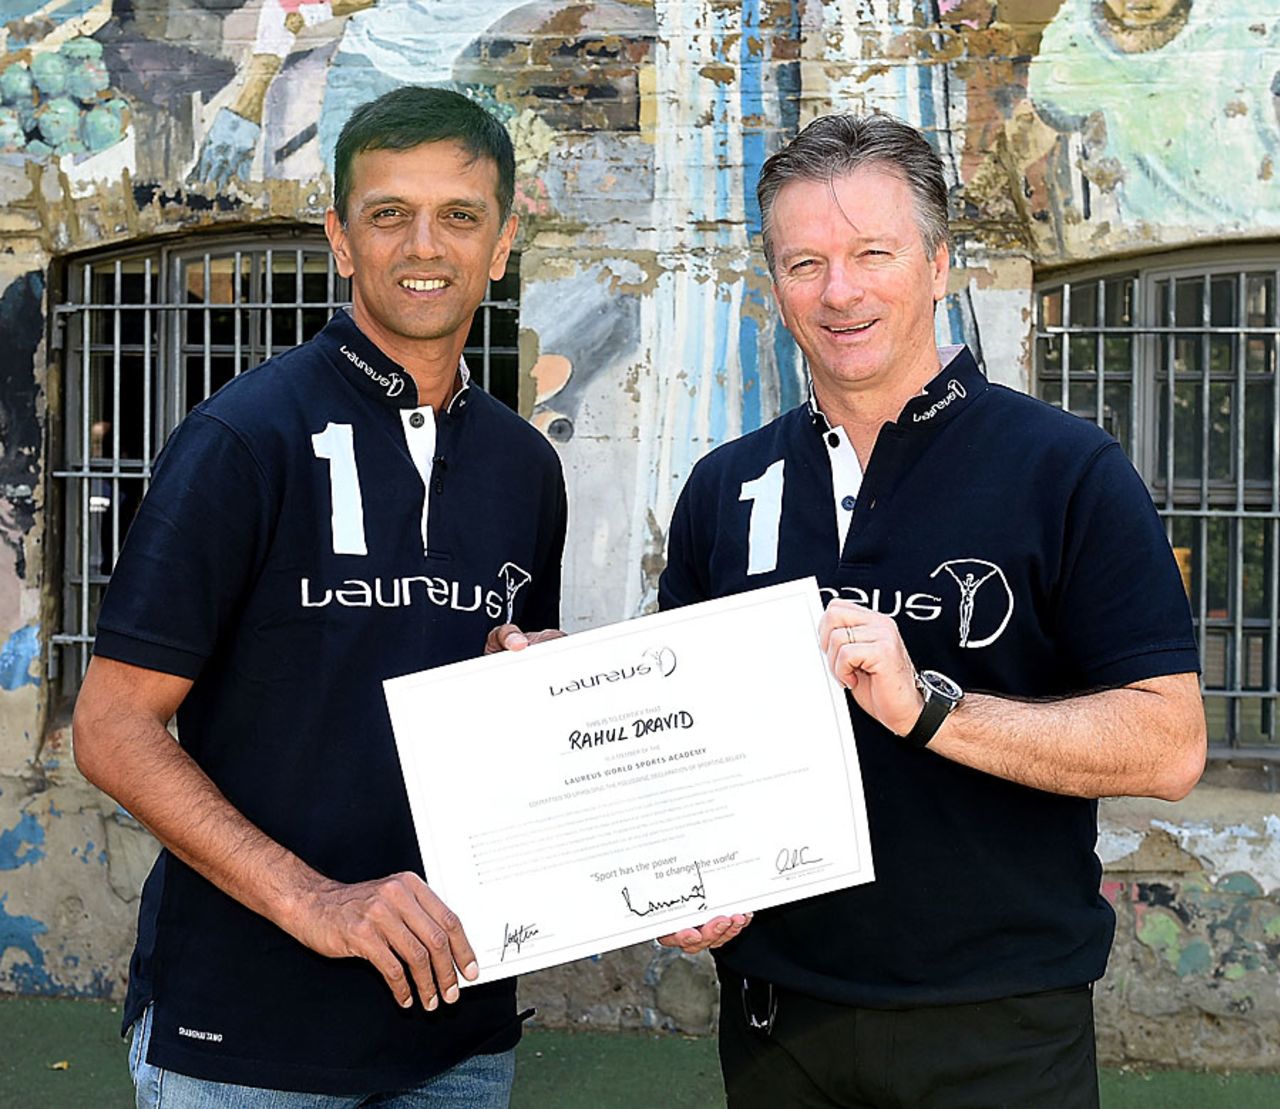 Steve Waugh with Rahul Dravid after the latter was inducted into the Laureus Sport for Good Foundation, London, July 16, 2014